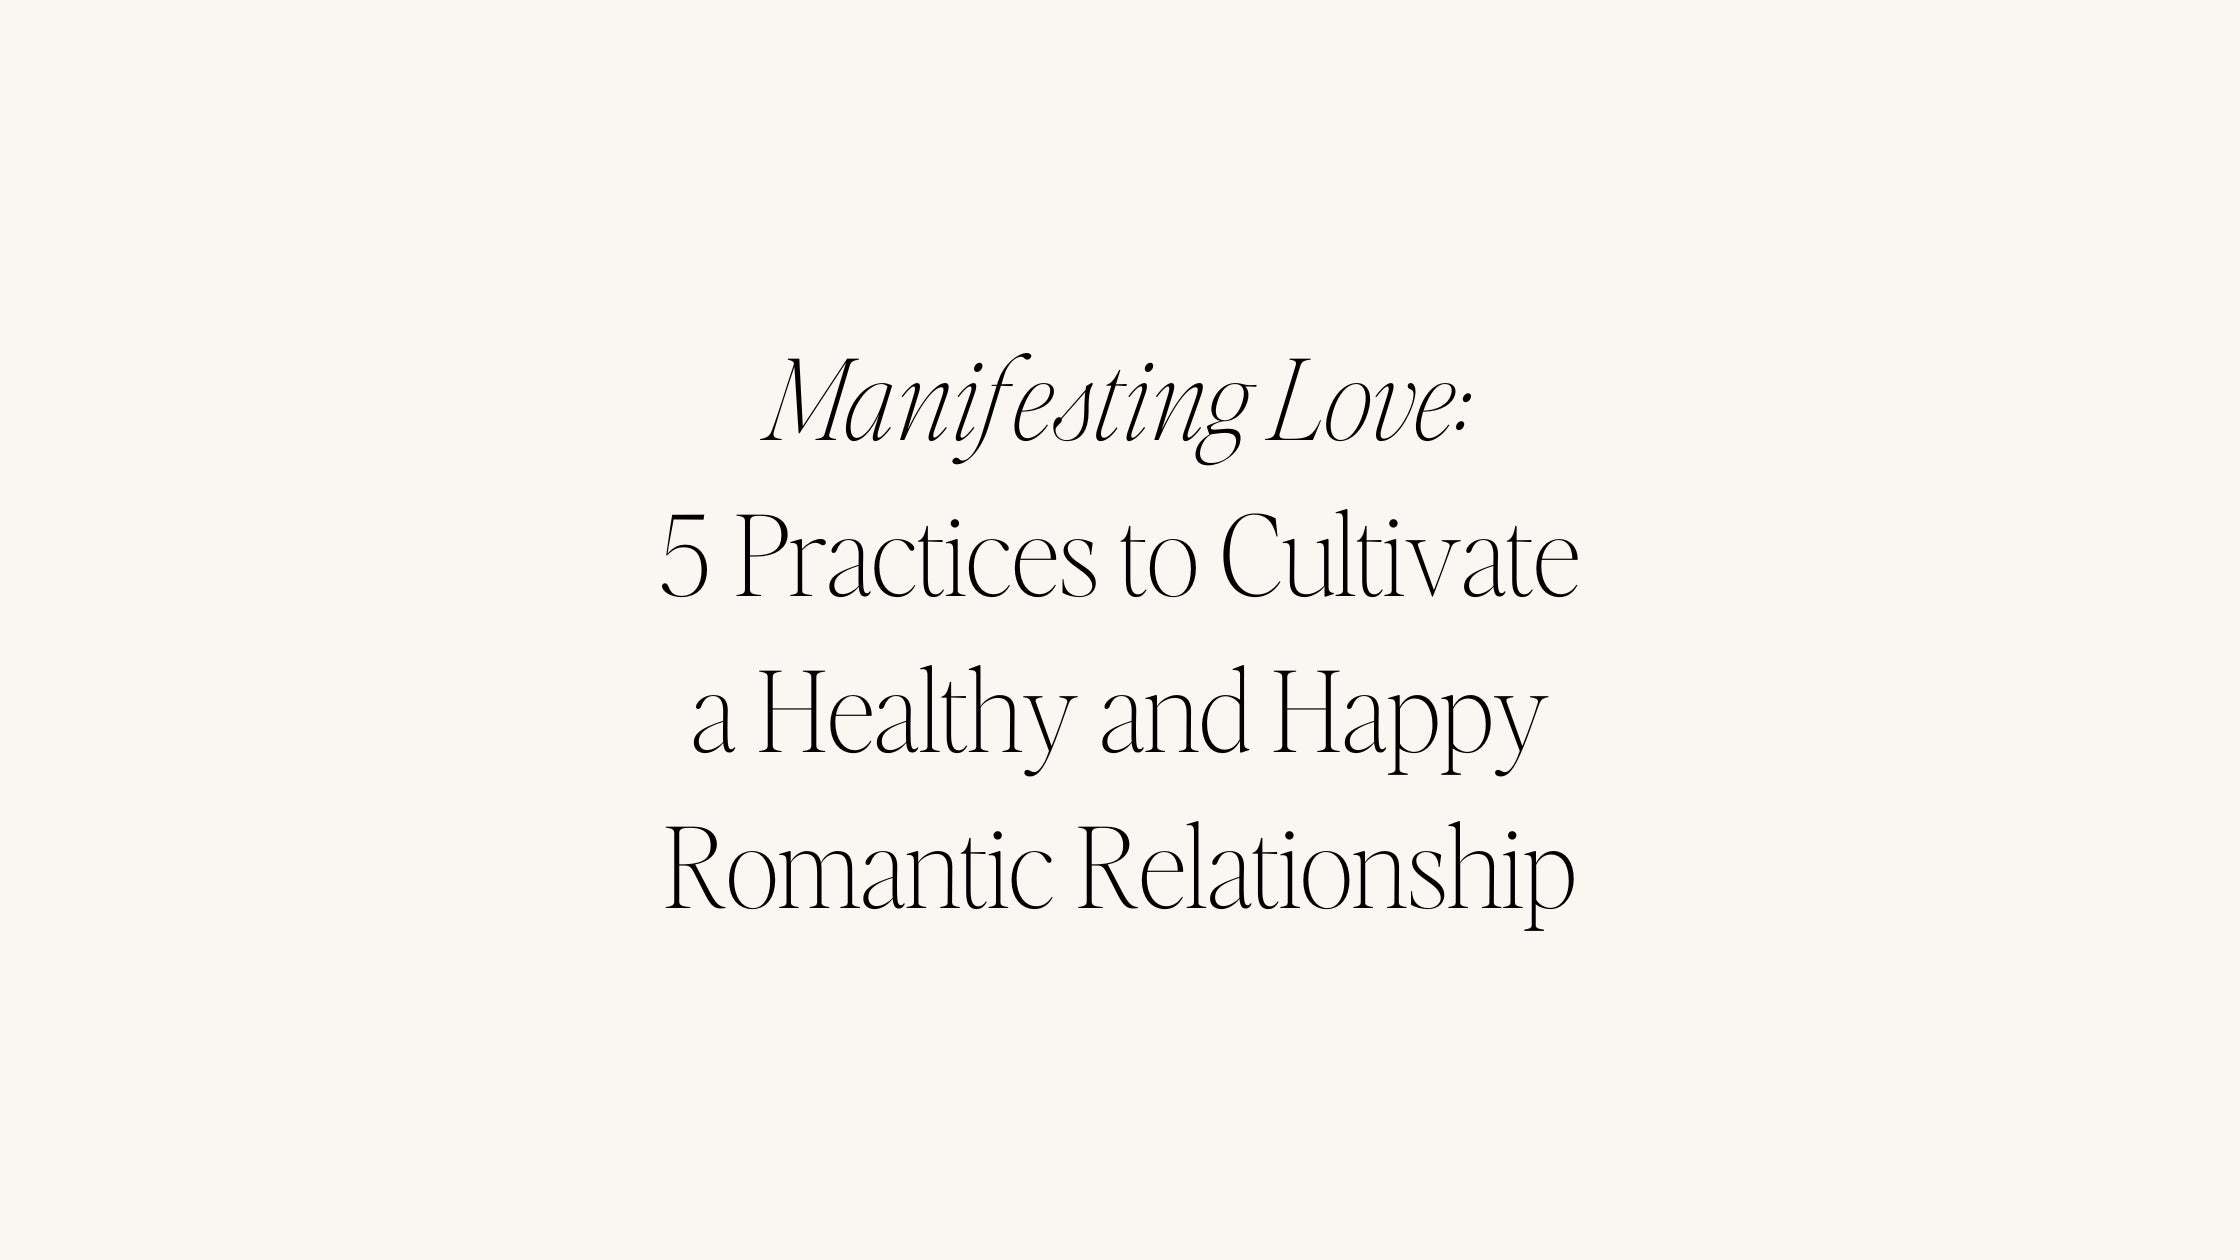 Manifesting Love: 5 Practices to Cultivate a Healthy and Happy Romantic Relationship